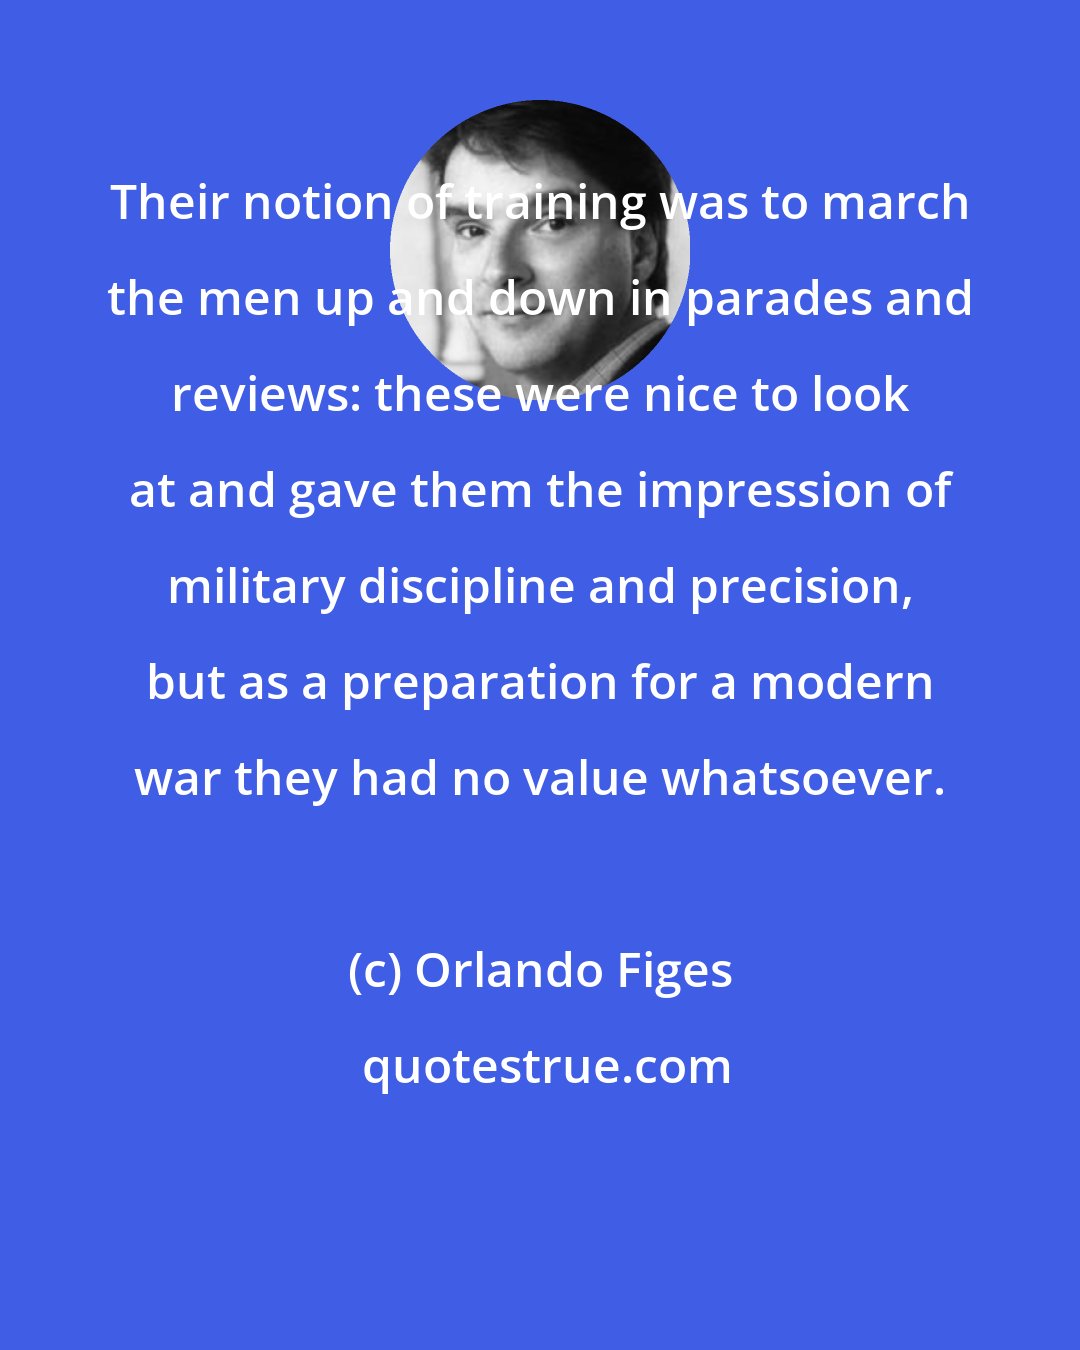 Orlando Figes: Their notion of training was to march the men up and down in parades and reviews: these were nice to look at and gave them the impression of military discipline and precision, but as a preparation for a modern war they had no value whatsoever.